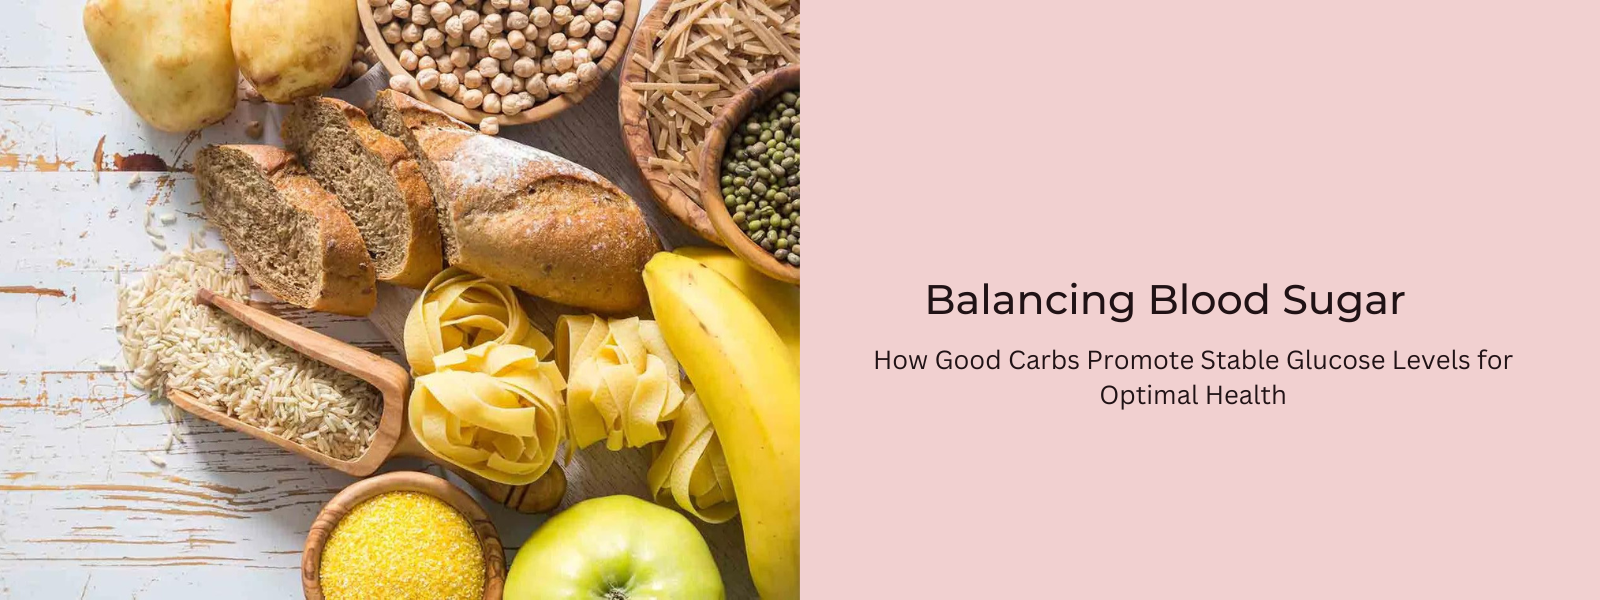 Balancing Blood Sugar: How Good Carbs Promote Stable Glucose Levels for Optimal Health